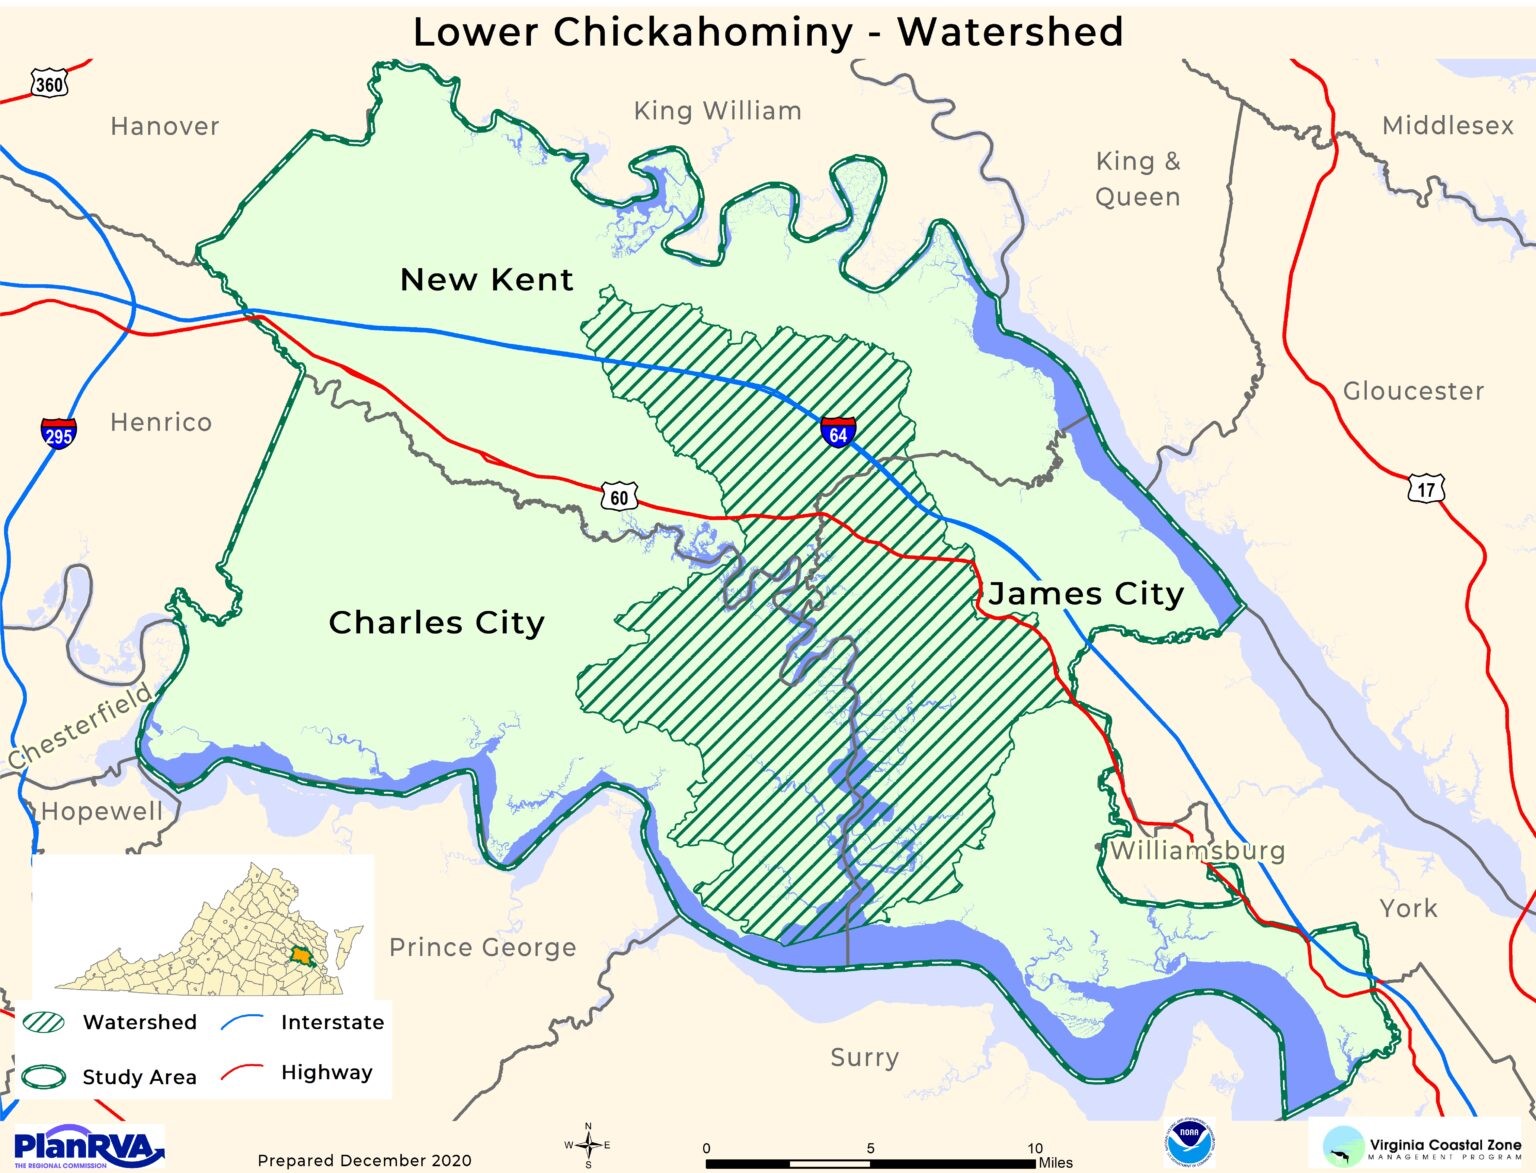 A map labeled Lower Chickahominy - Watershed. Several places are labeled on the study area, including Charles City, James City, and New Kent.